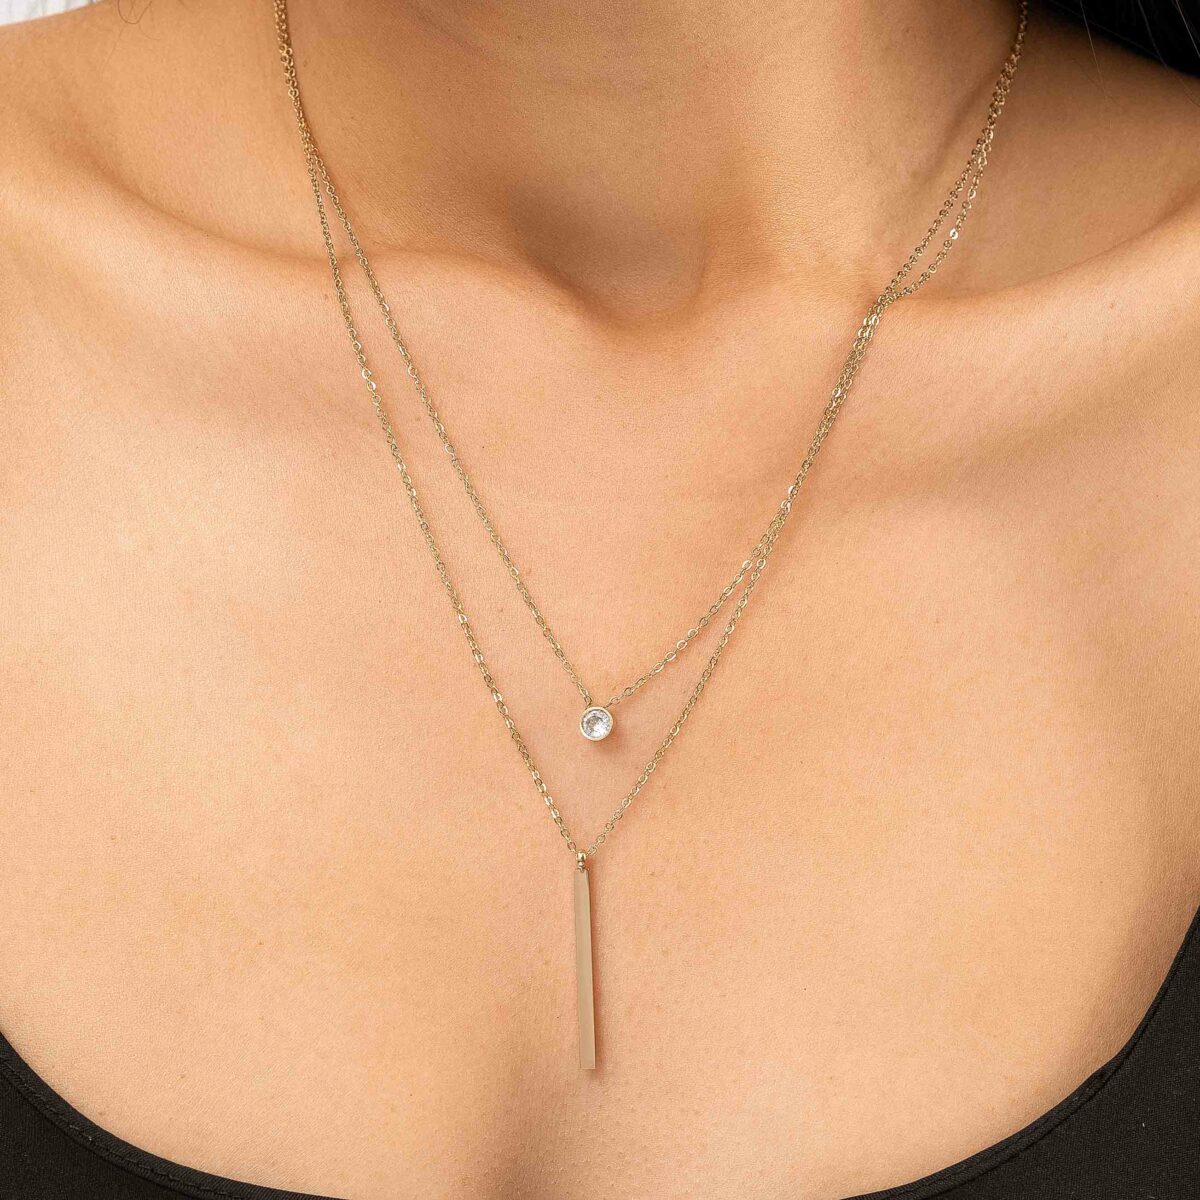 https://m.clubbella.co/product/solitaire-bar-necklace-2/ SOLITAIRE BAR NECKLACE (4)